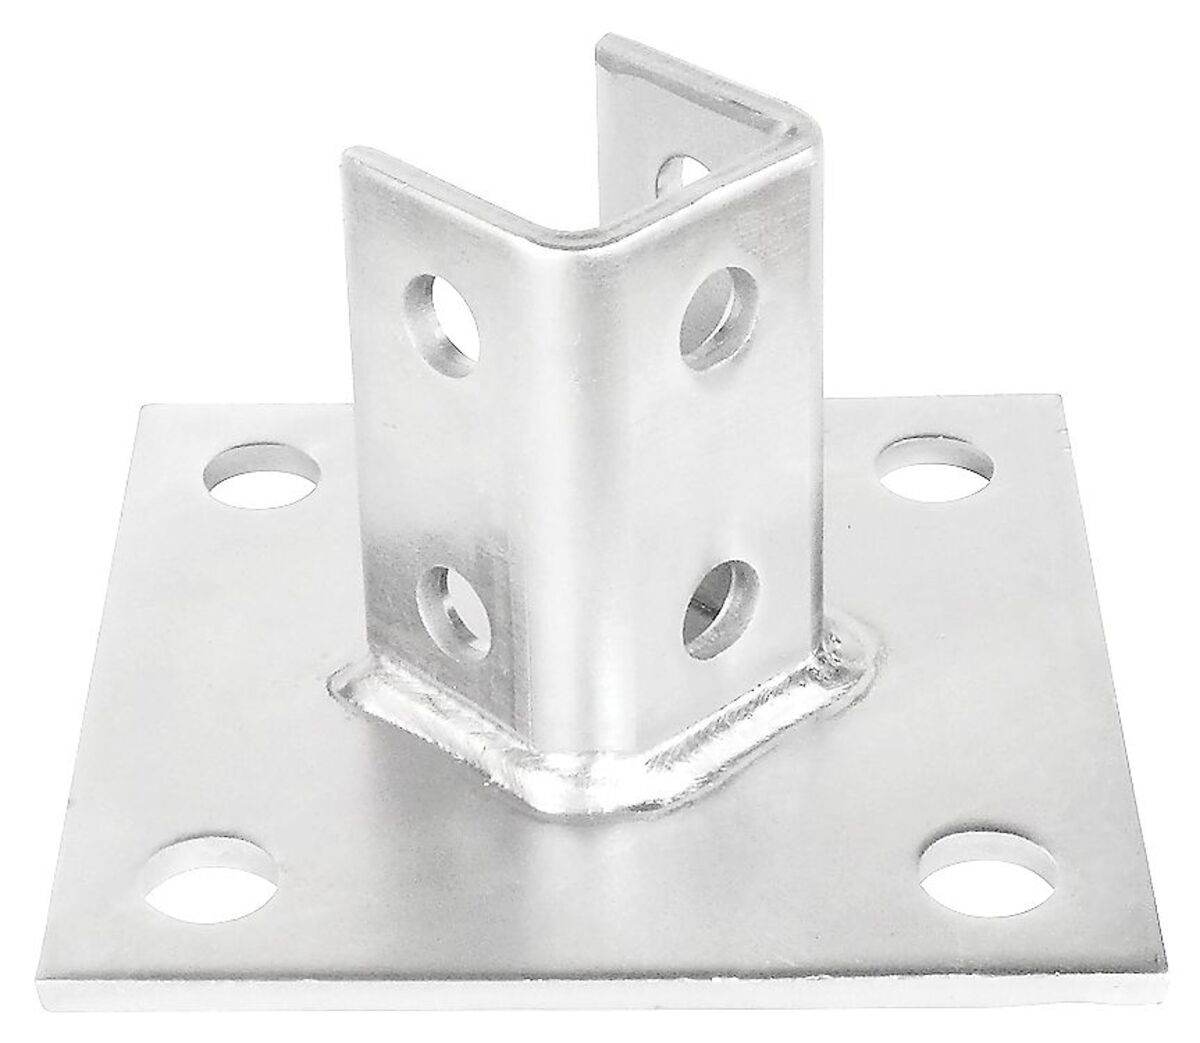 Four Hole Single Channel Post Base For 1-5/8" Strut  Steel, 5 Pack